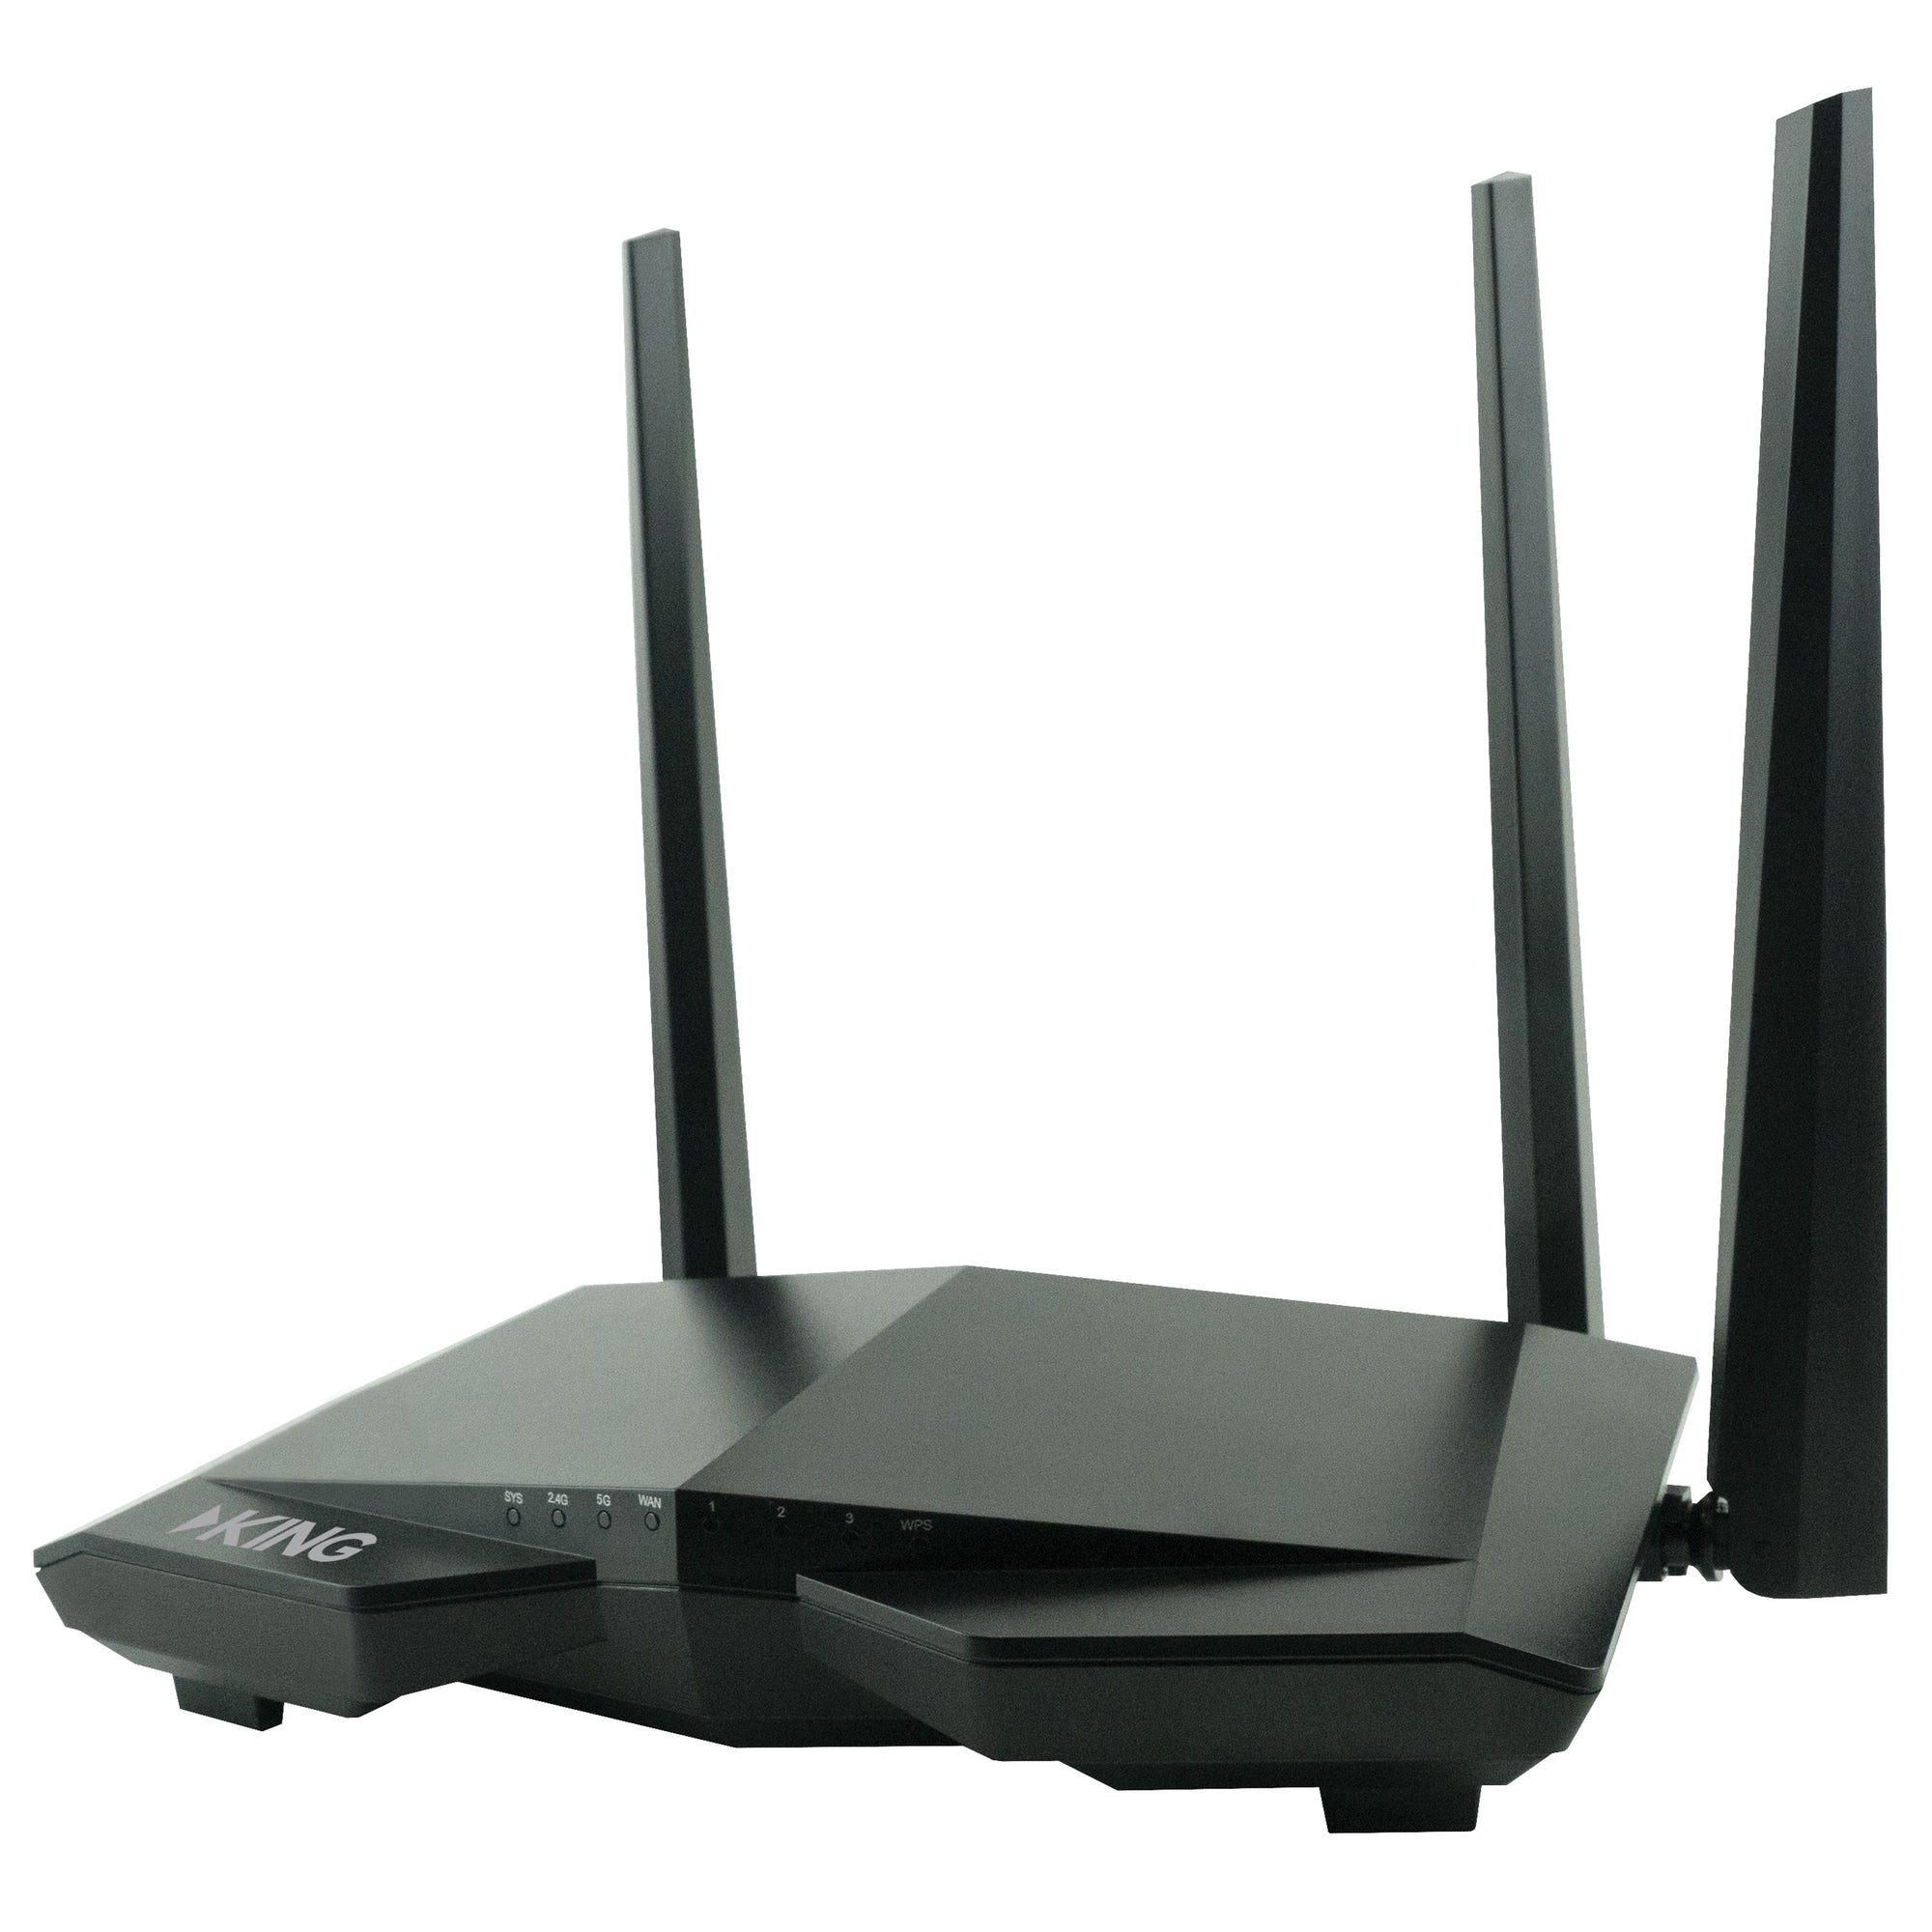 KING WIFIMAX ROUTER & RANGE